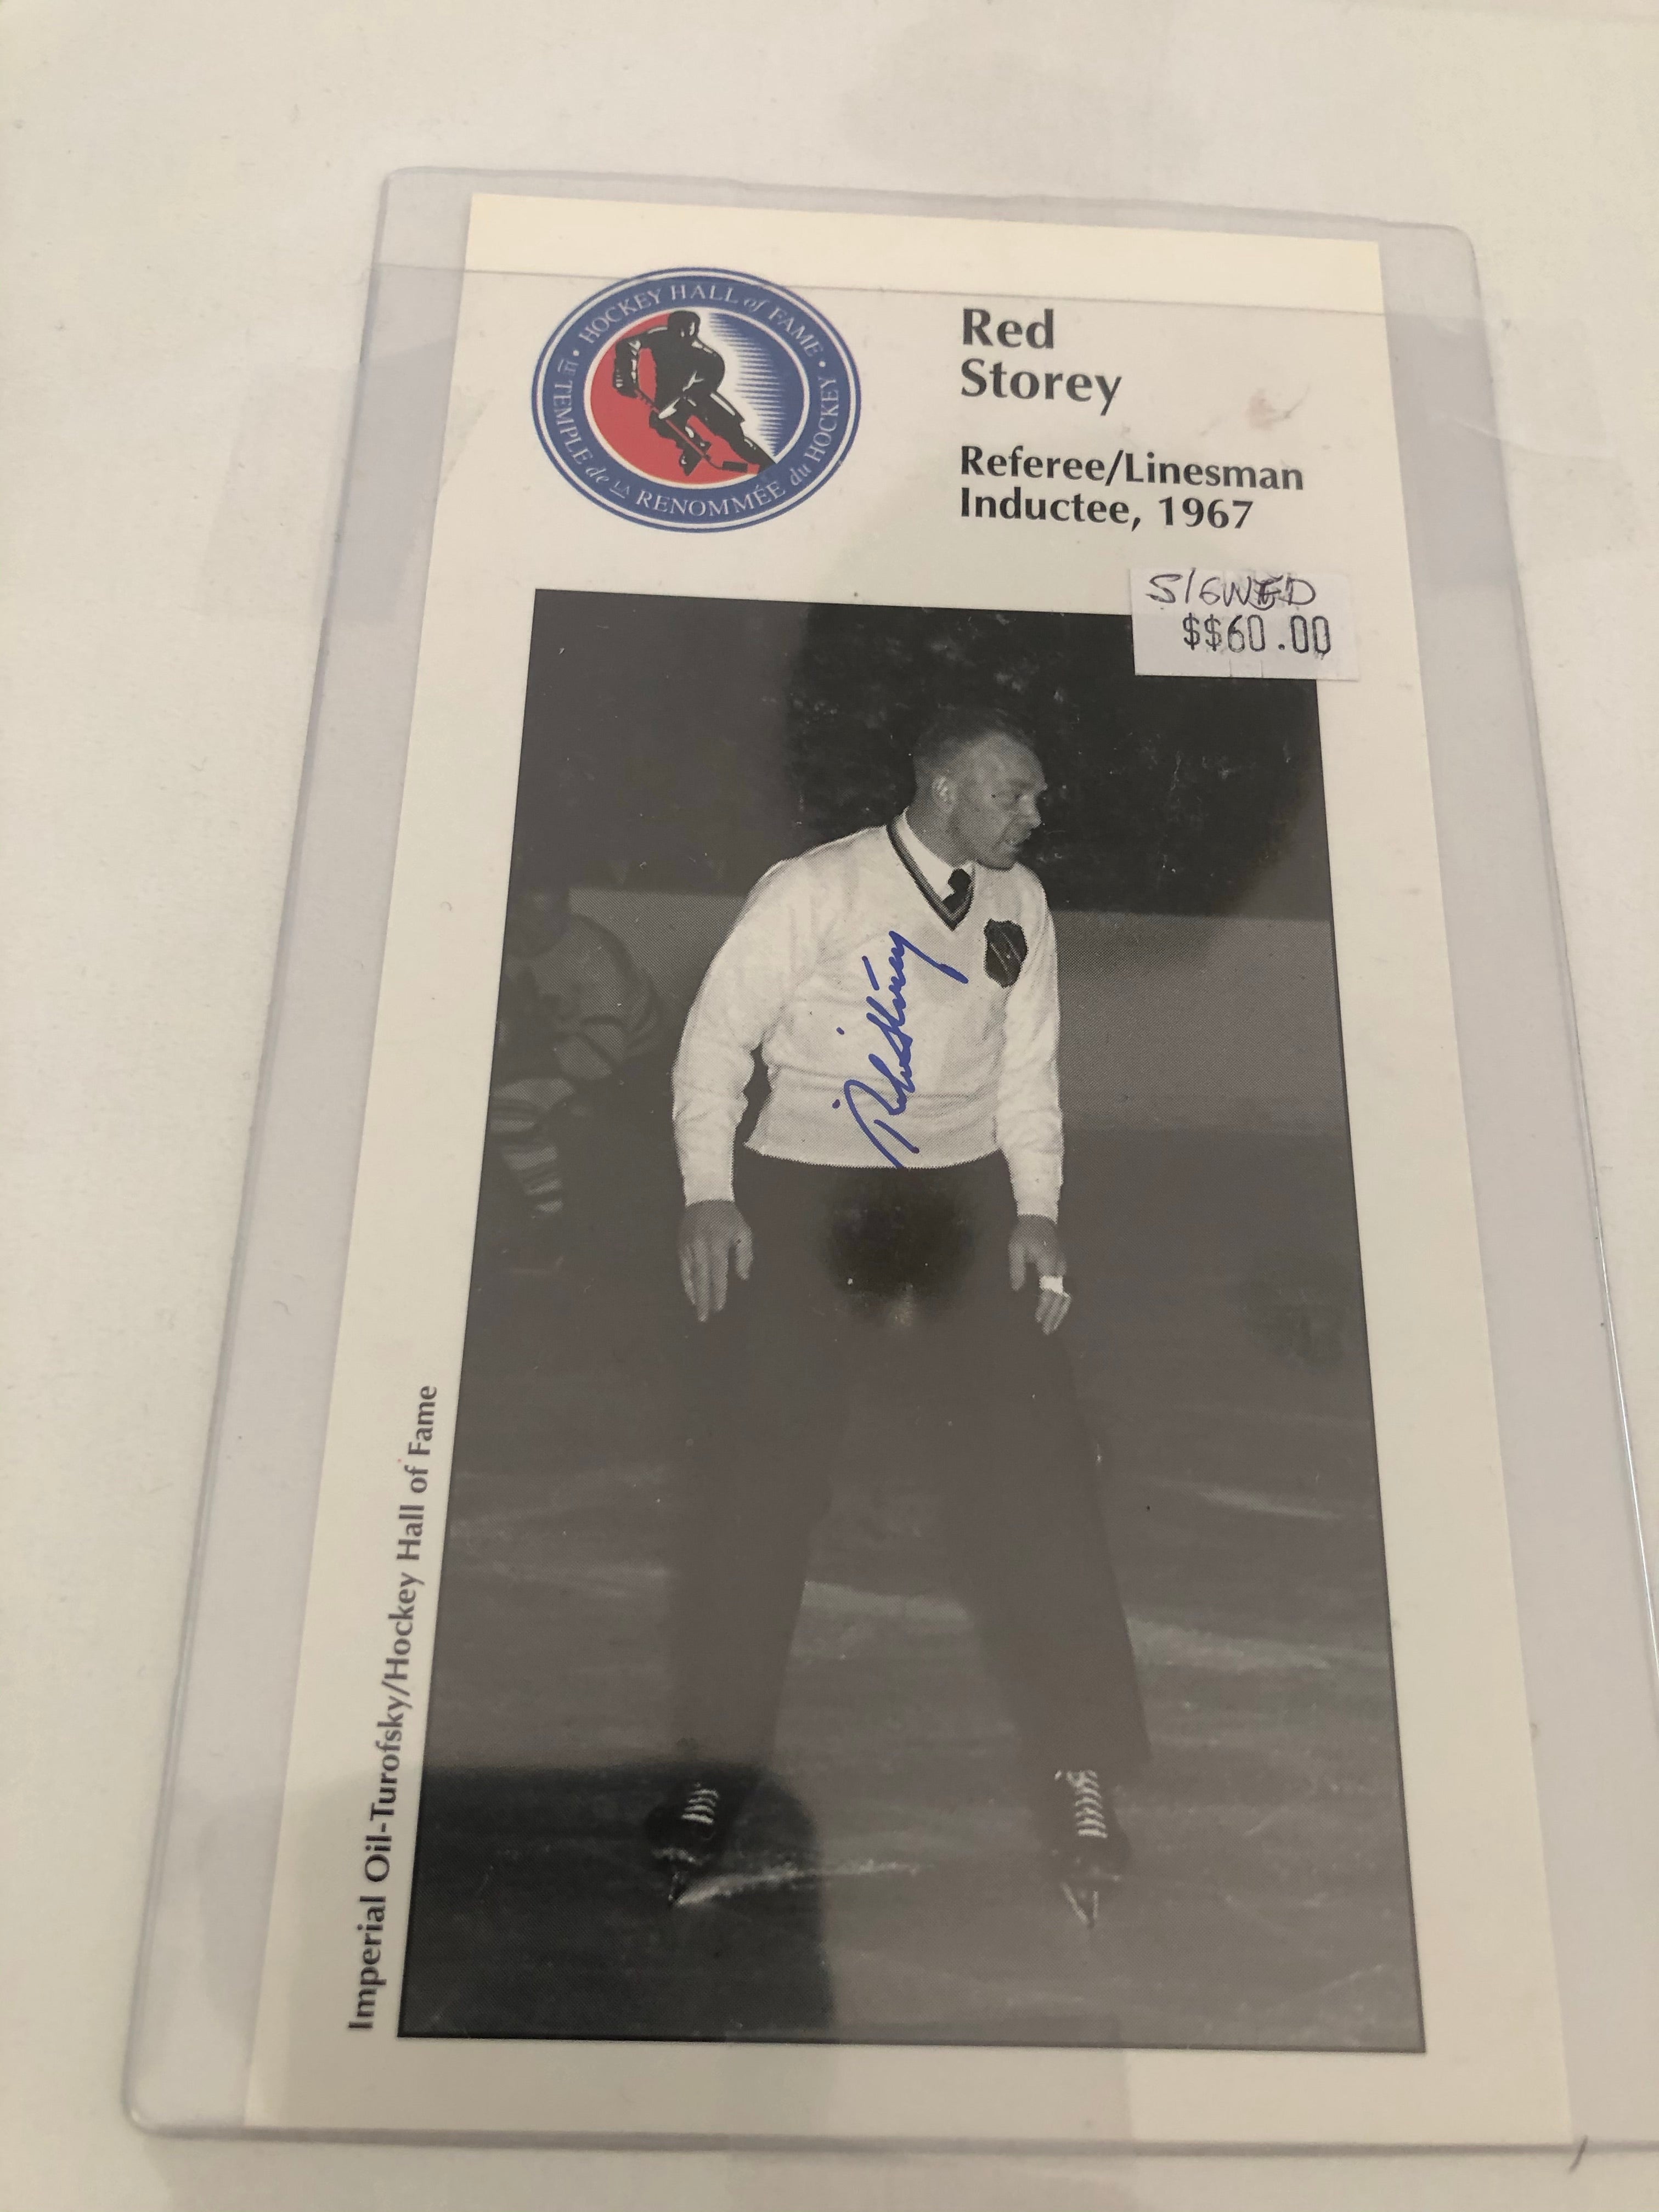 Red Storey hockey Legend Referee rare signed postcard with COA